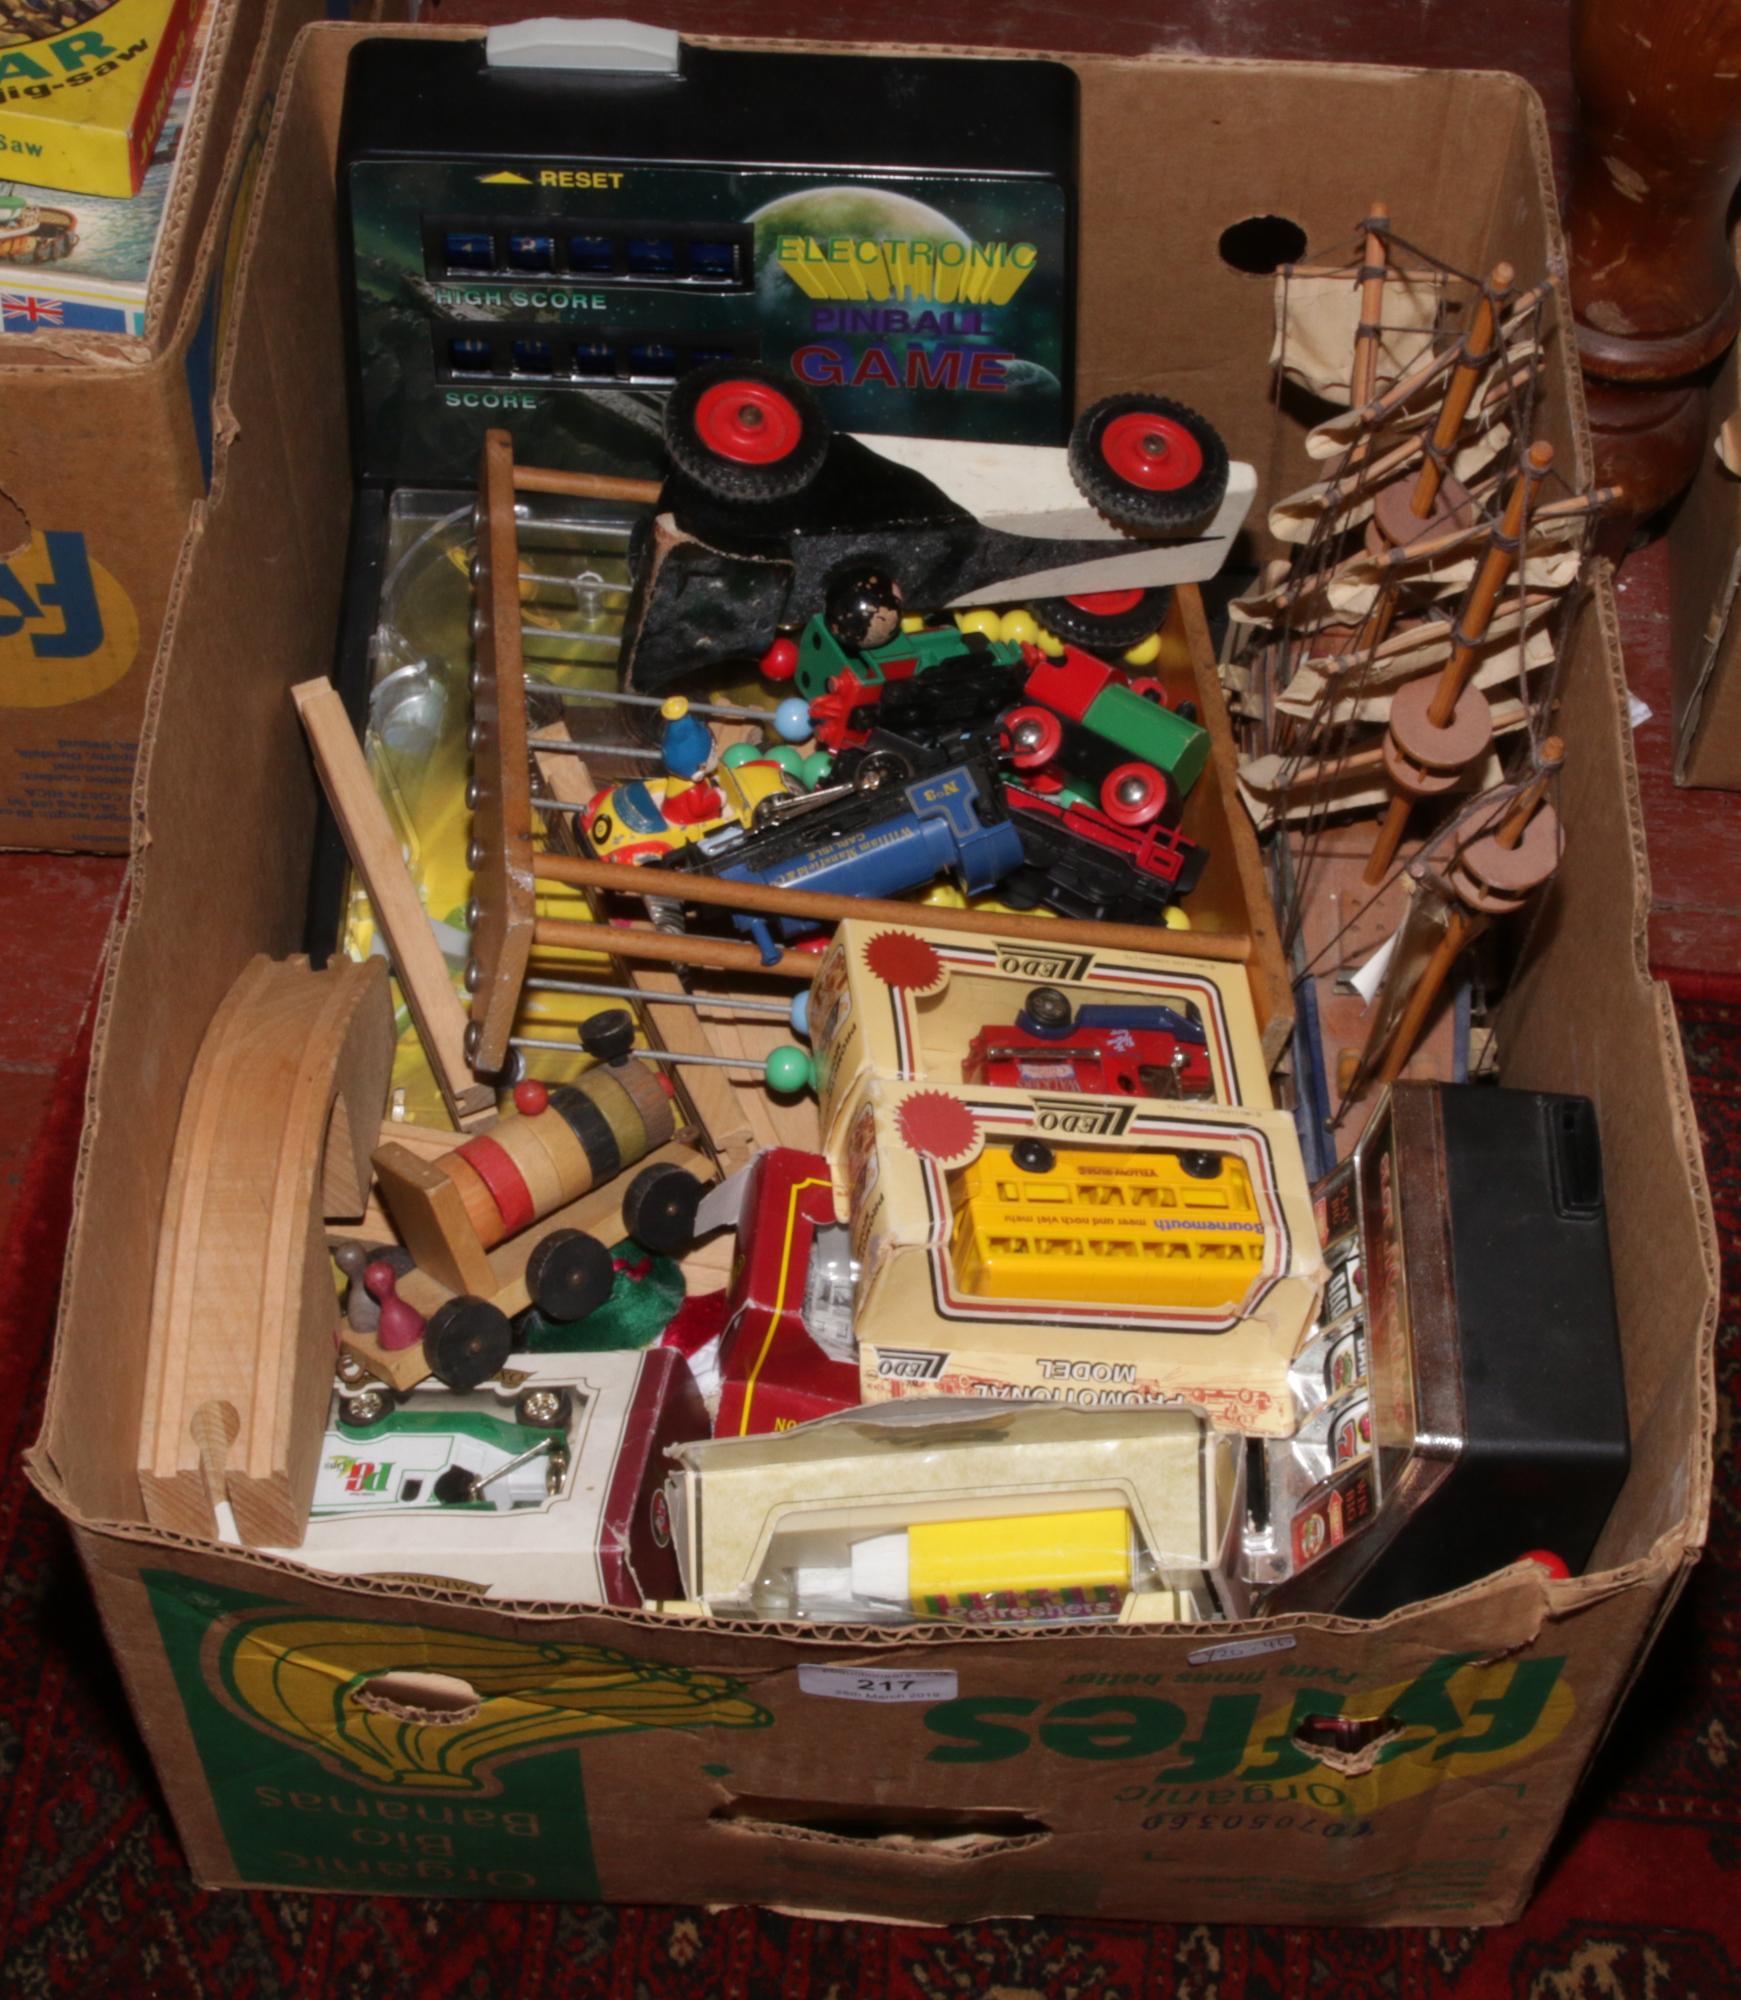 A box of toys including boxed Diecast vehicles, wooden train set, pinball games etc.